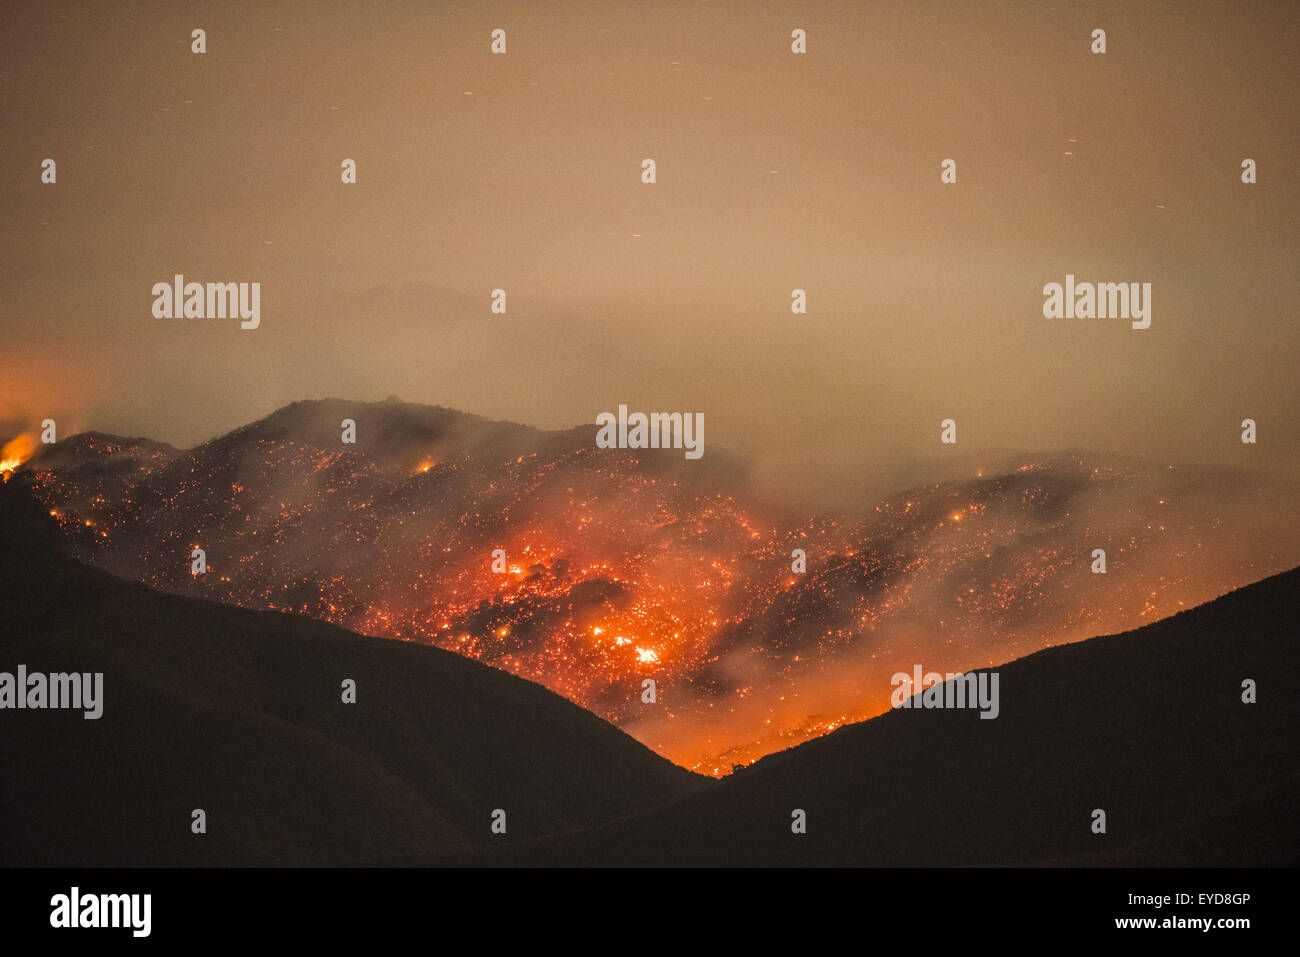 Aguanga, CA, USA. 24th July, 2015. The Cutca Fire burns at night in the Cleveland National Forest on Palomar Mountain Friday Night July 24, 2015. The fire was estimated at 200 acres and was 0% contained. The fire is burning in heavy fuels in remote terrain and crews were being flown in to battle the blaze overnight. The cause of the fire is suspected to be a holdover lightning strike that ignited. © Stuart Palley/ZUMA Wire/Alamy Live News Stock Photo